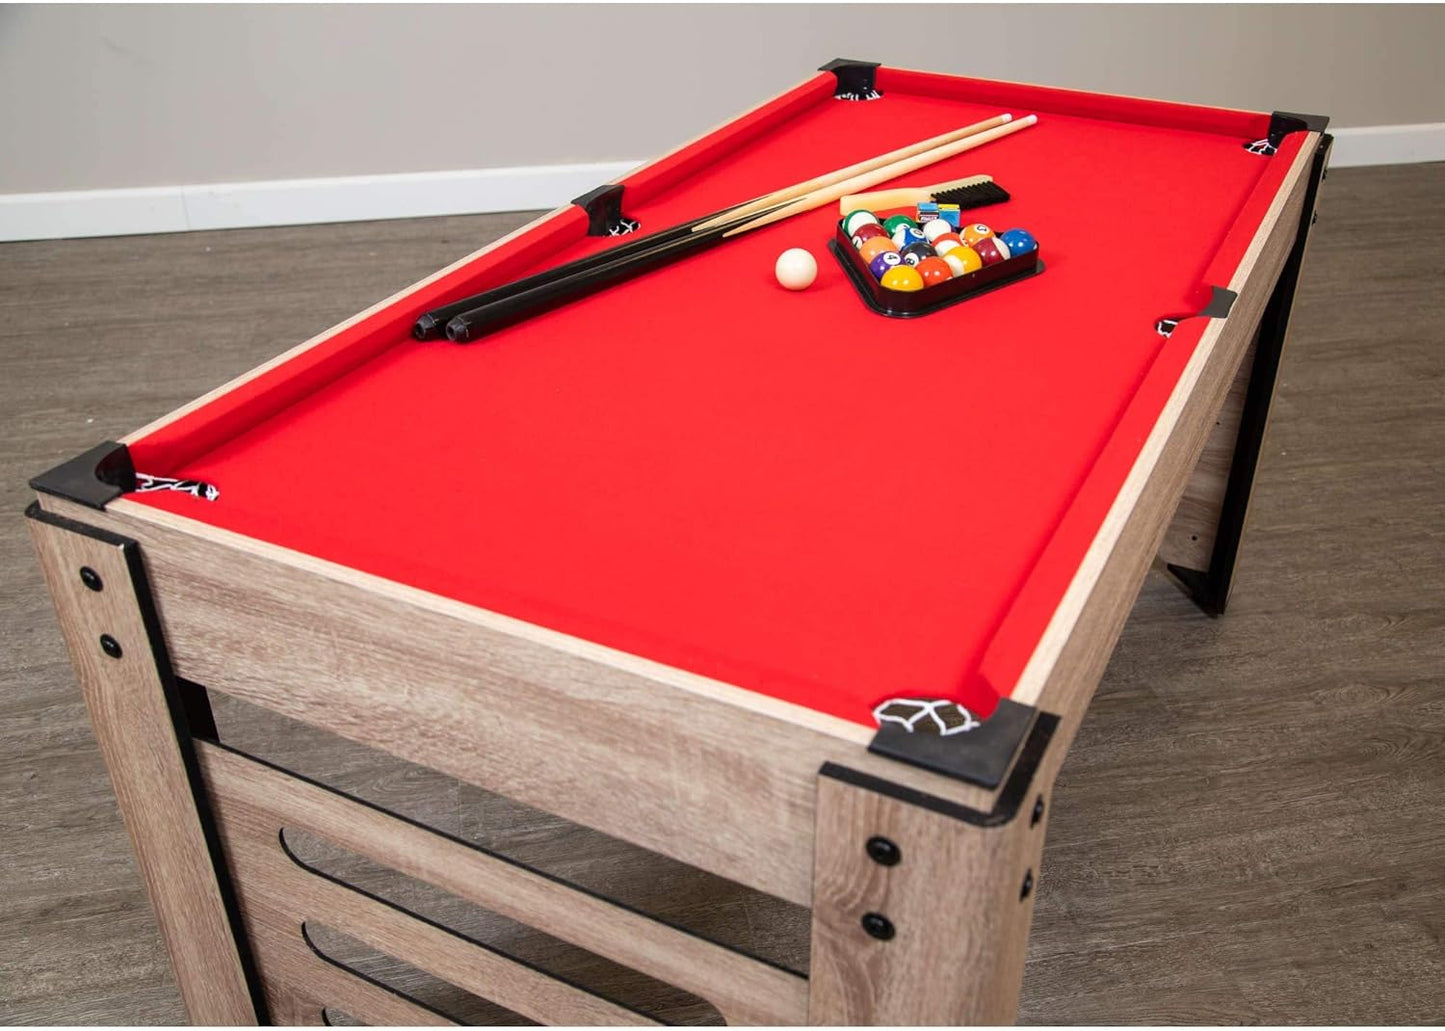 Madison 54-In 6 in 1 Multigame Table, Ideal for Family Game Rooms, Includes Billiards, Foosball, Slide Hockey, Table Tennis, Mini-Shuffleboard and Mini-Bowling,Driftwood